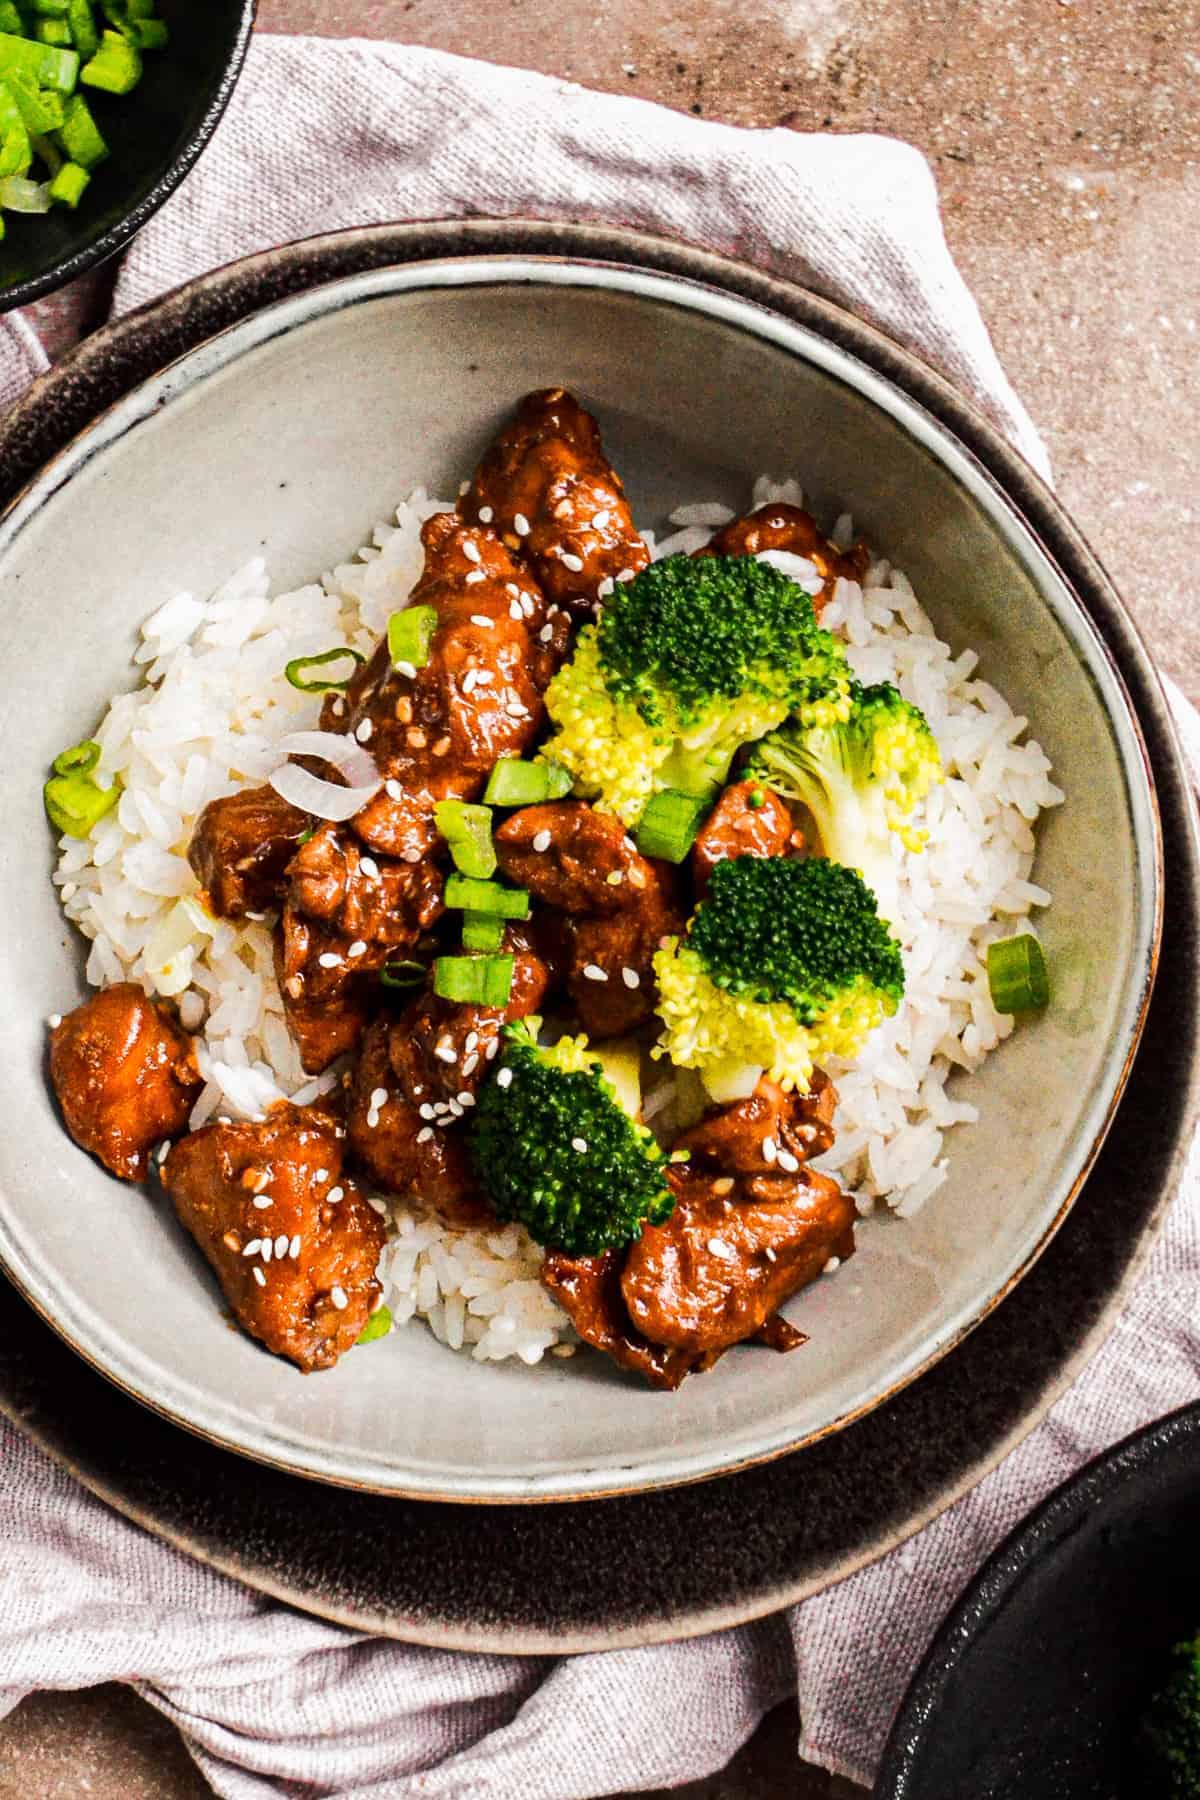 Traditional Teriyaki Chicken Recipe - Easy Chicken Recipes (HOW TO VIDEO)